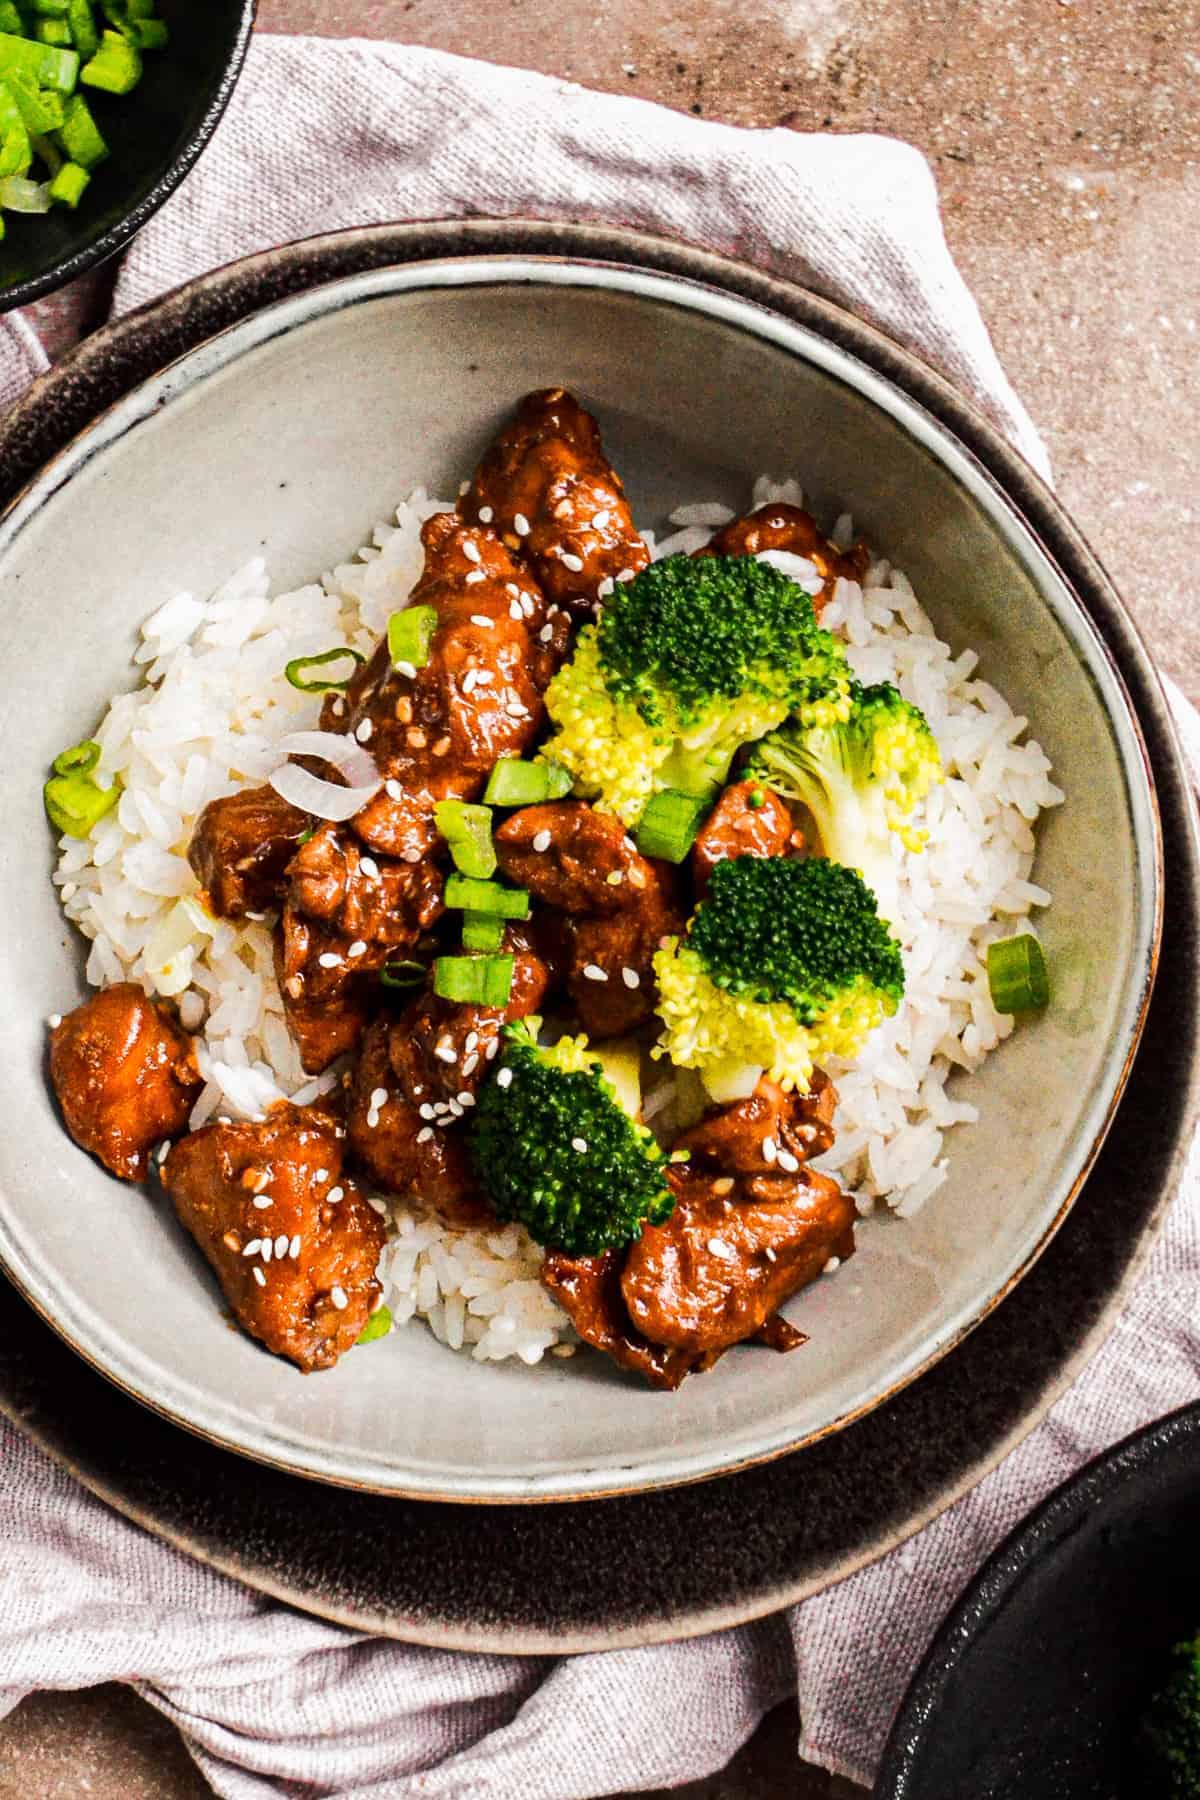 Traditional Teriyaki Chicken Recipe - Easy Chicken Recipes (HOW TO VIDEO)